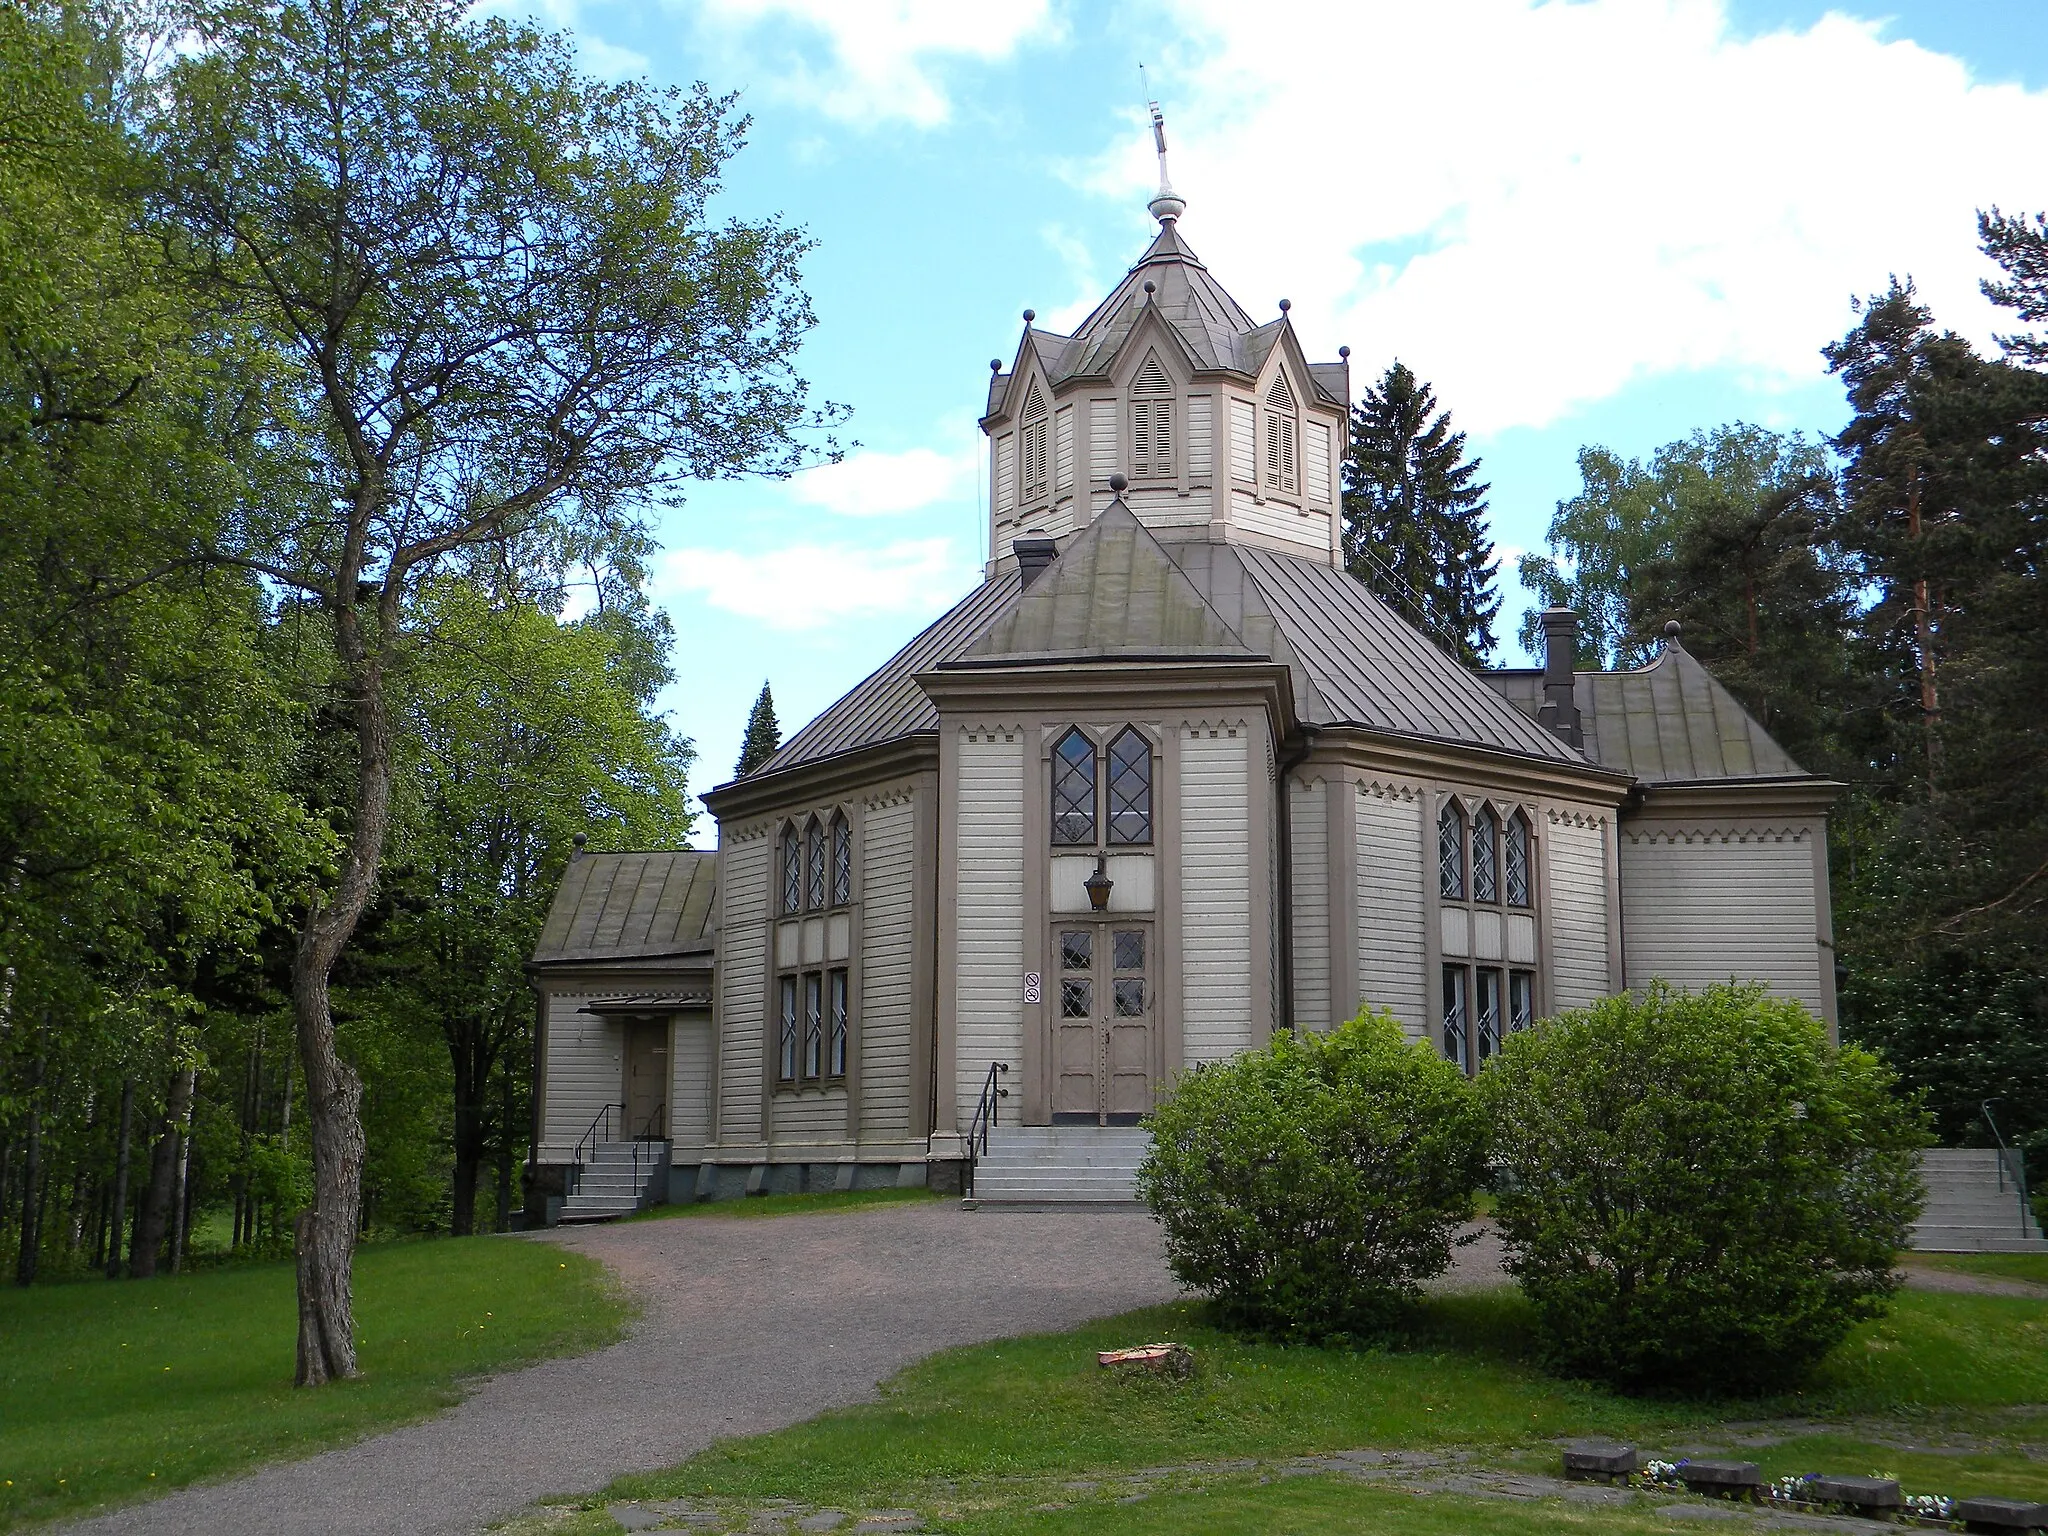 Photo showing: The church of Strömfors Ironworks was built in the 1770s. The Ironworks is located at Ruotsinpyhtää, Finland.